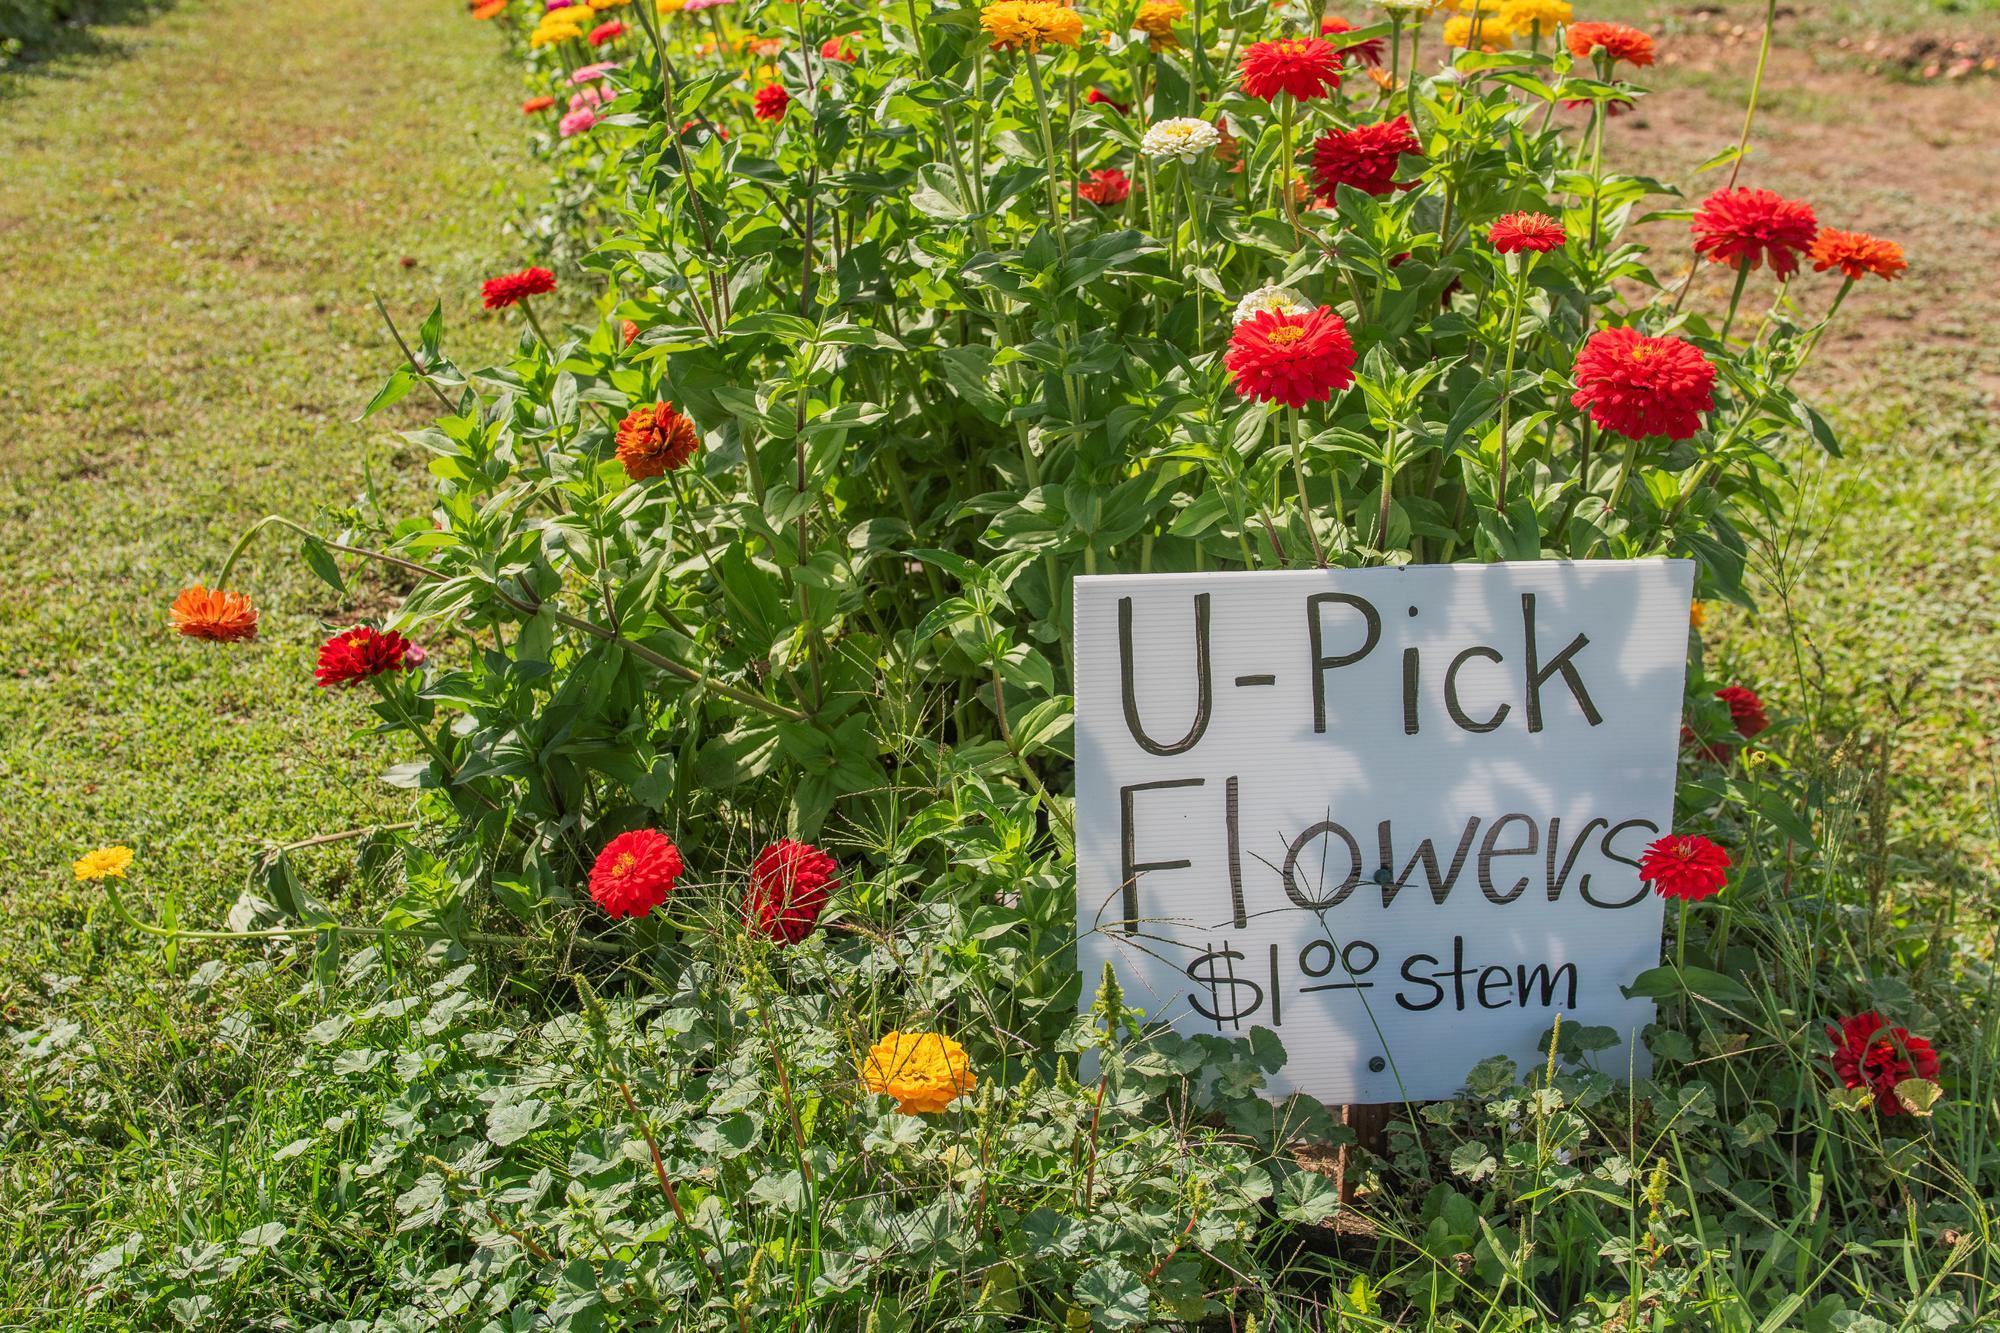 A sign reading "U-pick flowers" sits in front of a bed of red and yellow zinnias